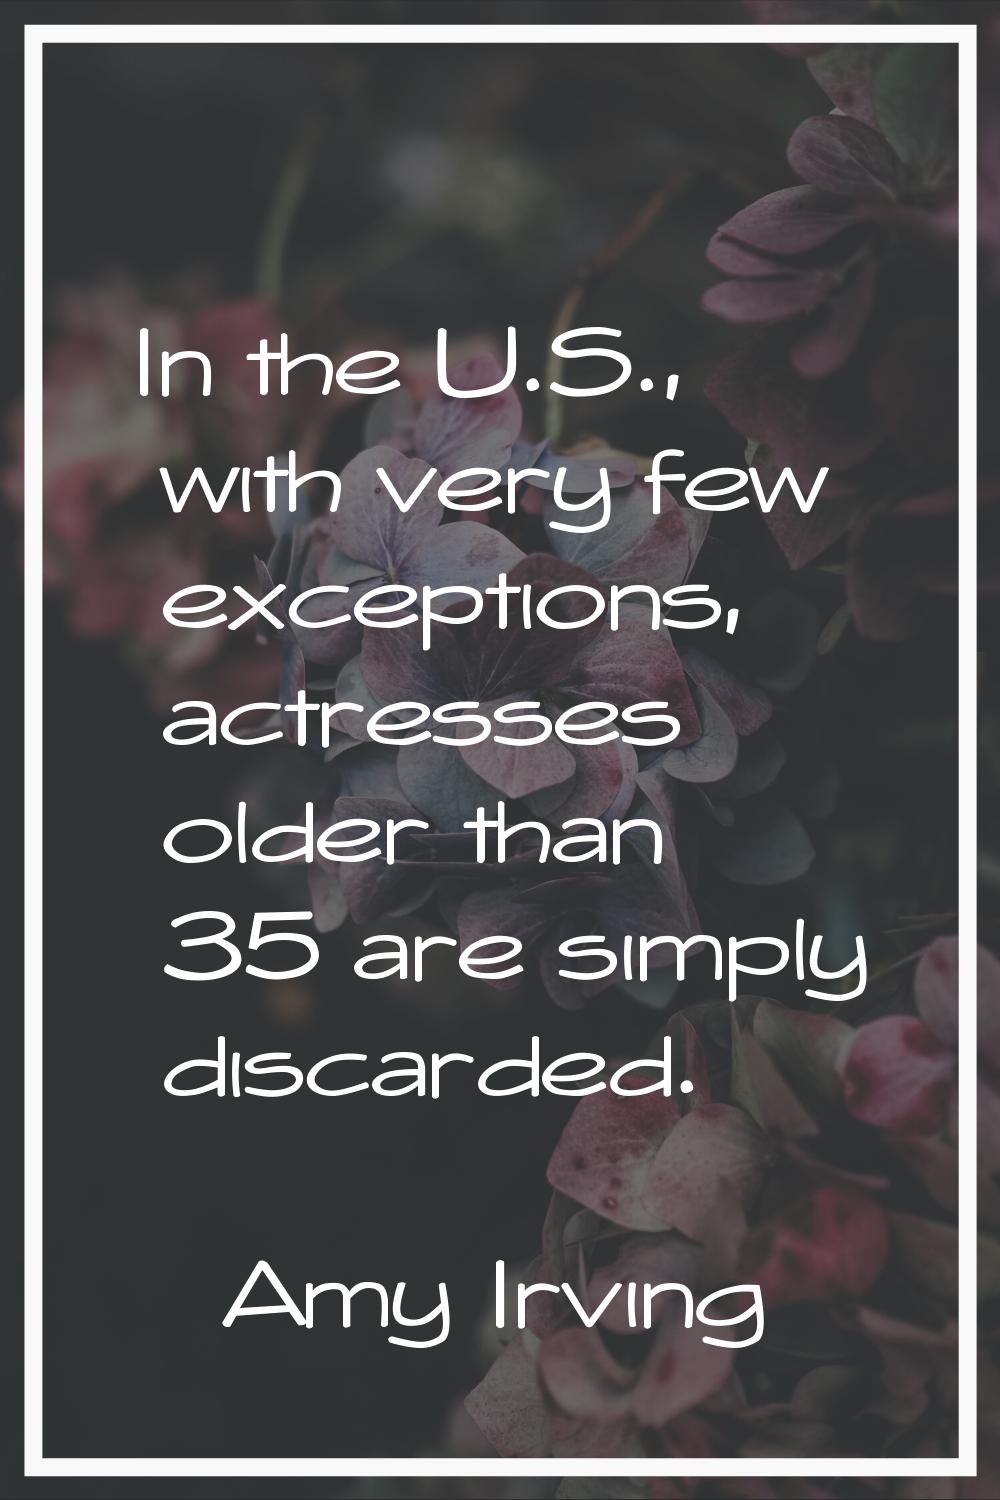 In the U.S., with very few exceptions, actresses older than 35 are simply discarded.